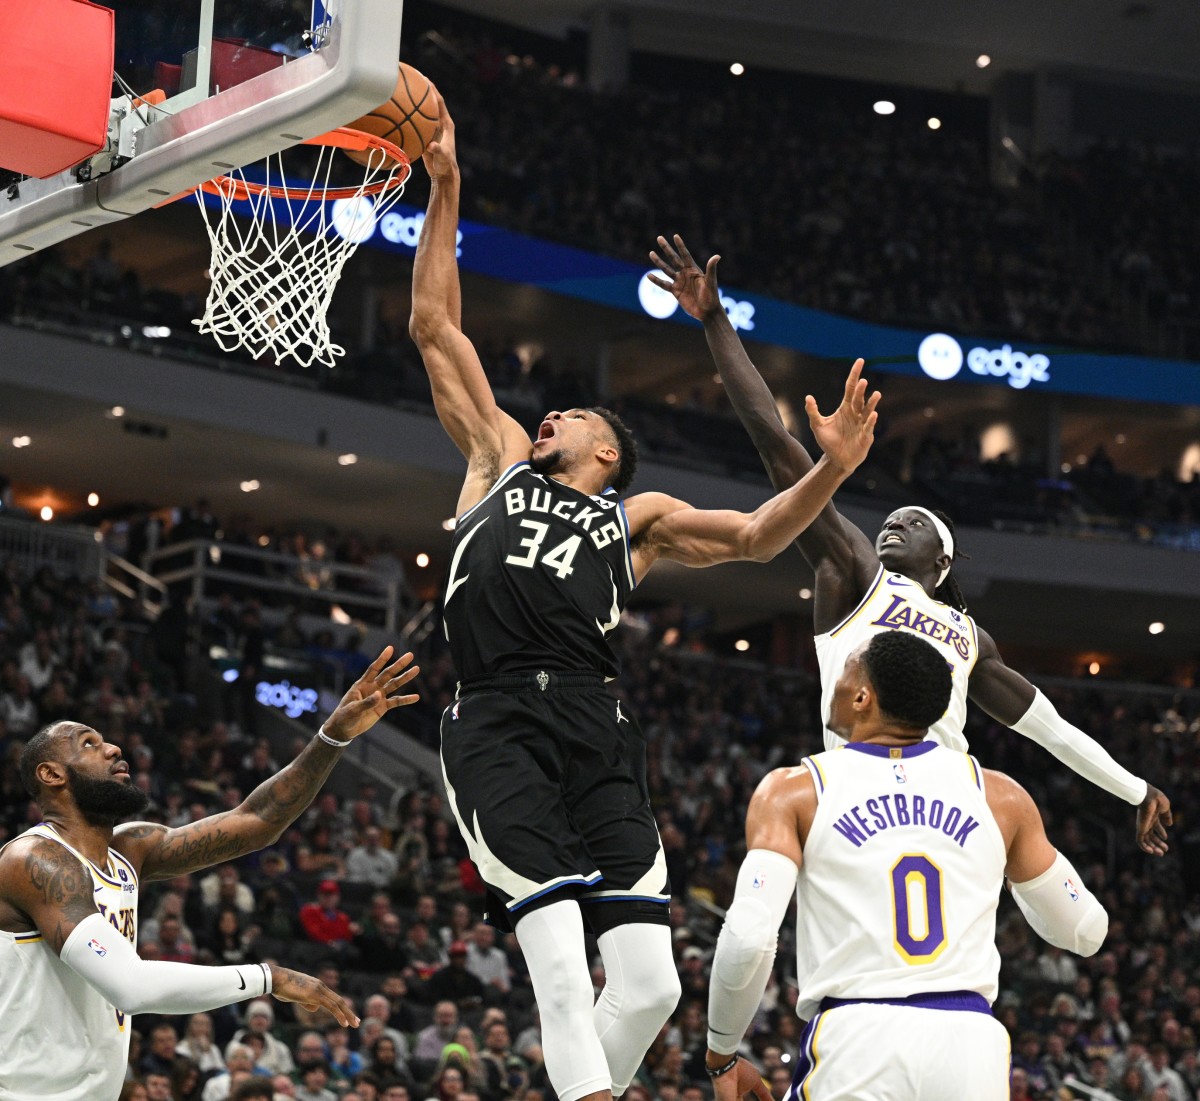 Giannis & Lopez pulled off two big blocks last night vs Lakers